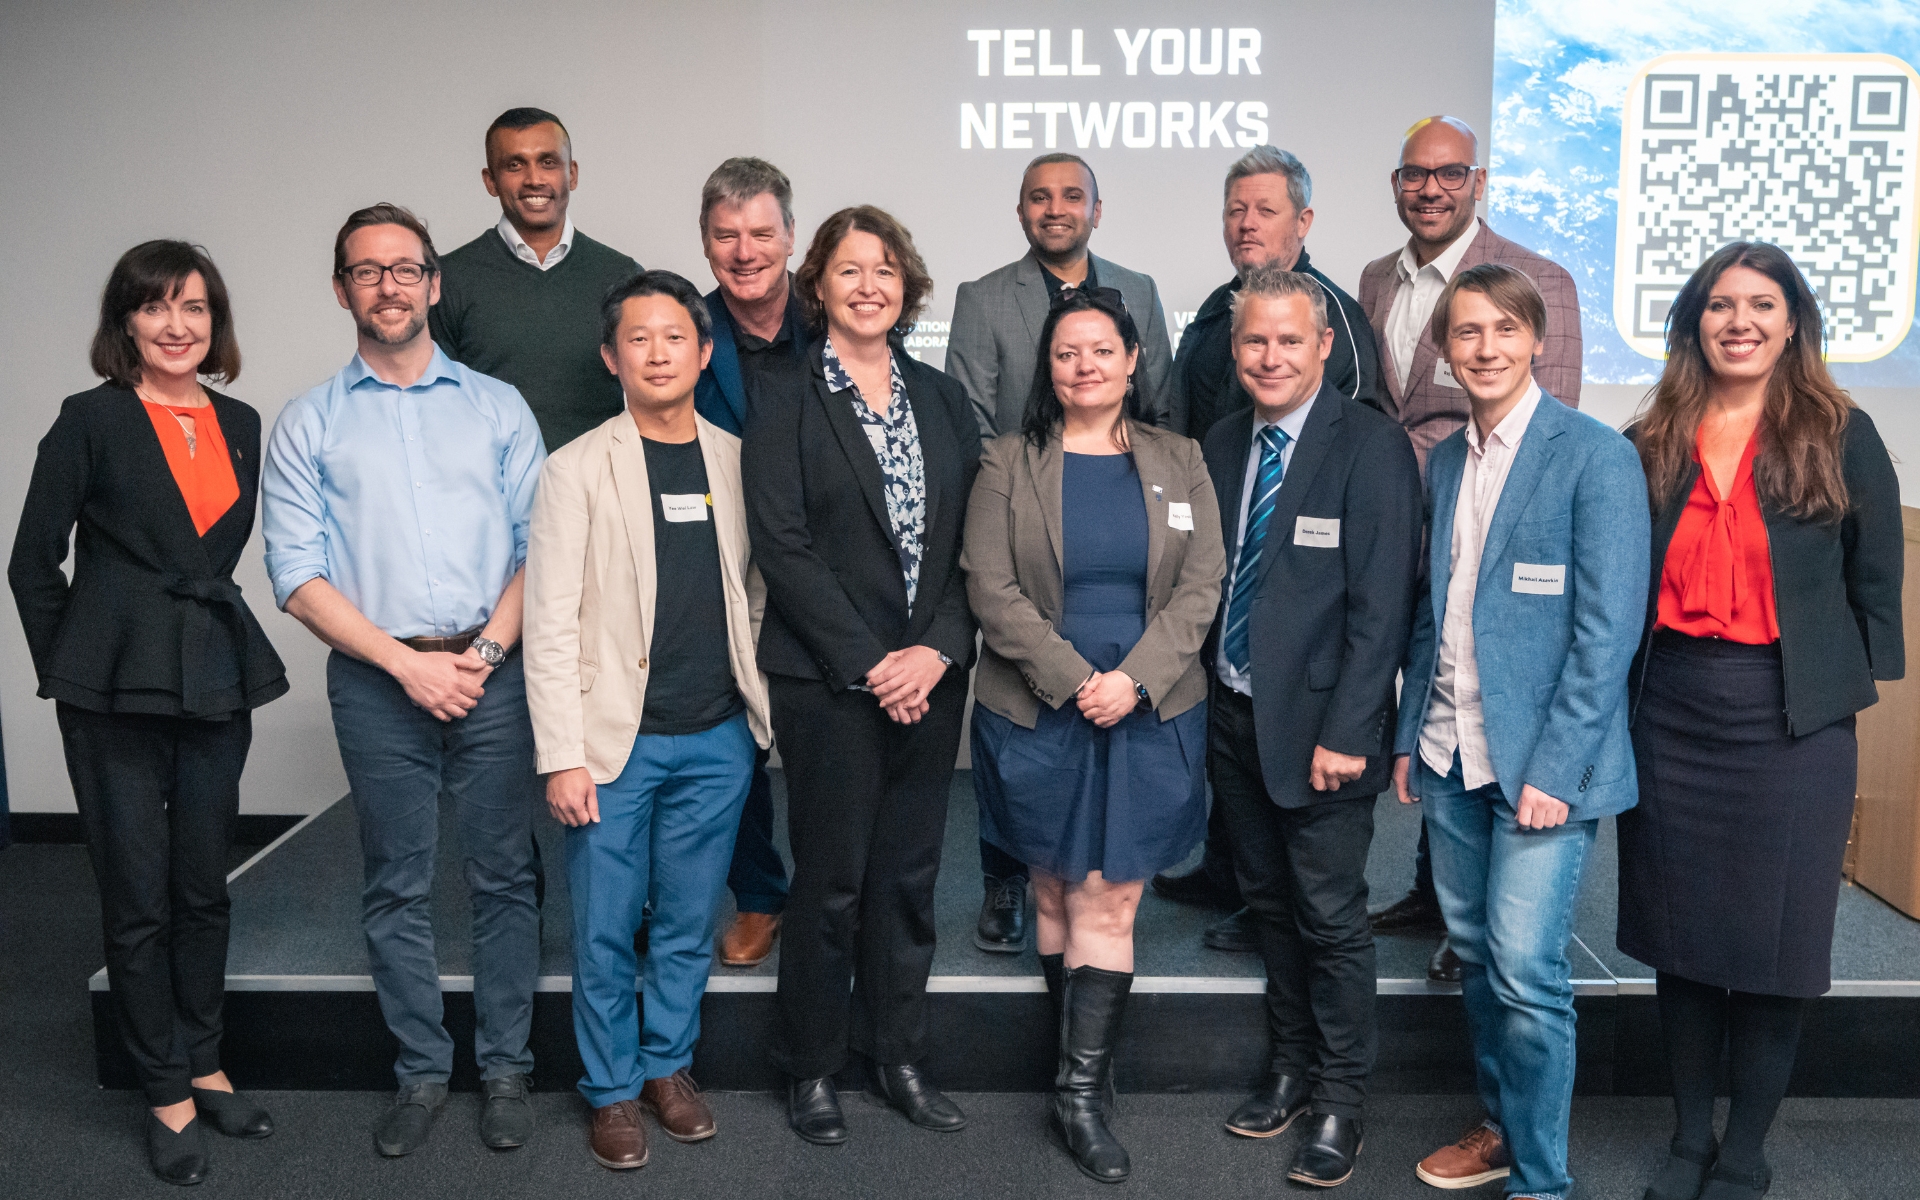 Some of the 2022 Venture Catalyst Space graduating cohort with the Honourable Susan Close MP (far left) and UniSA Director of Incubation Services and Venture Catalyst Founder, Jasmine Vreugdenburg.